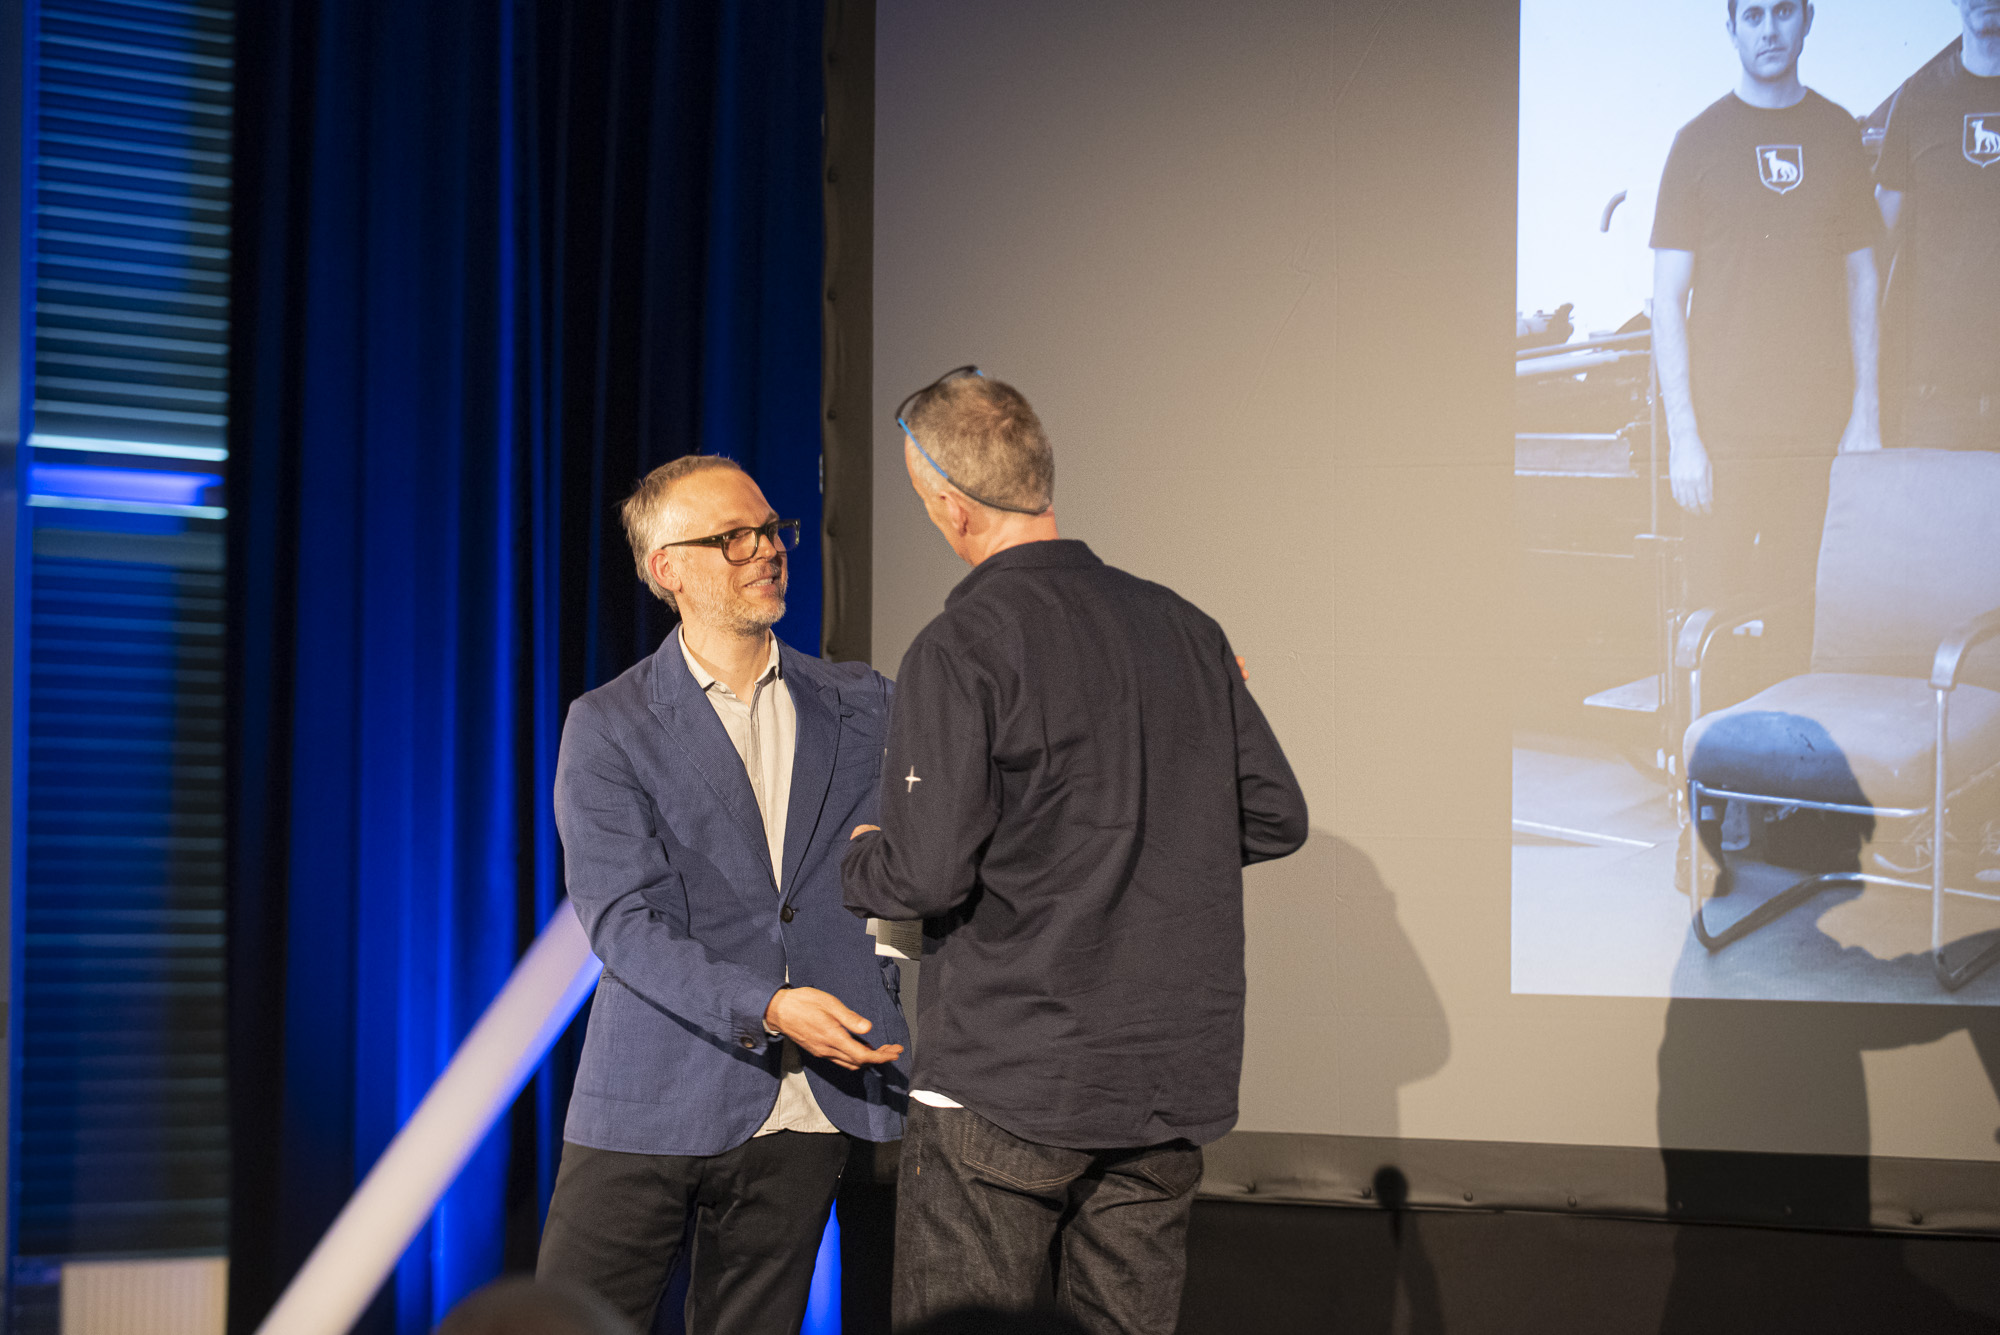 Swiss Design Awards ceremony, Laurent Benner and Thomi Wolfensberger